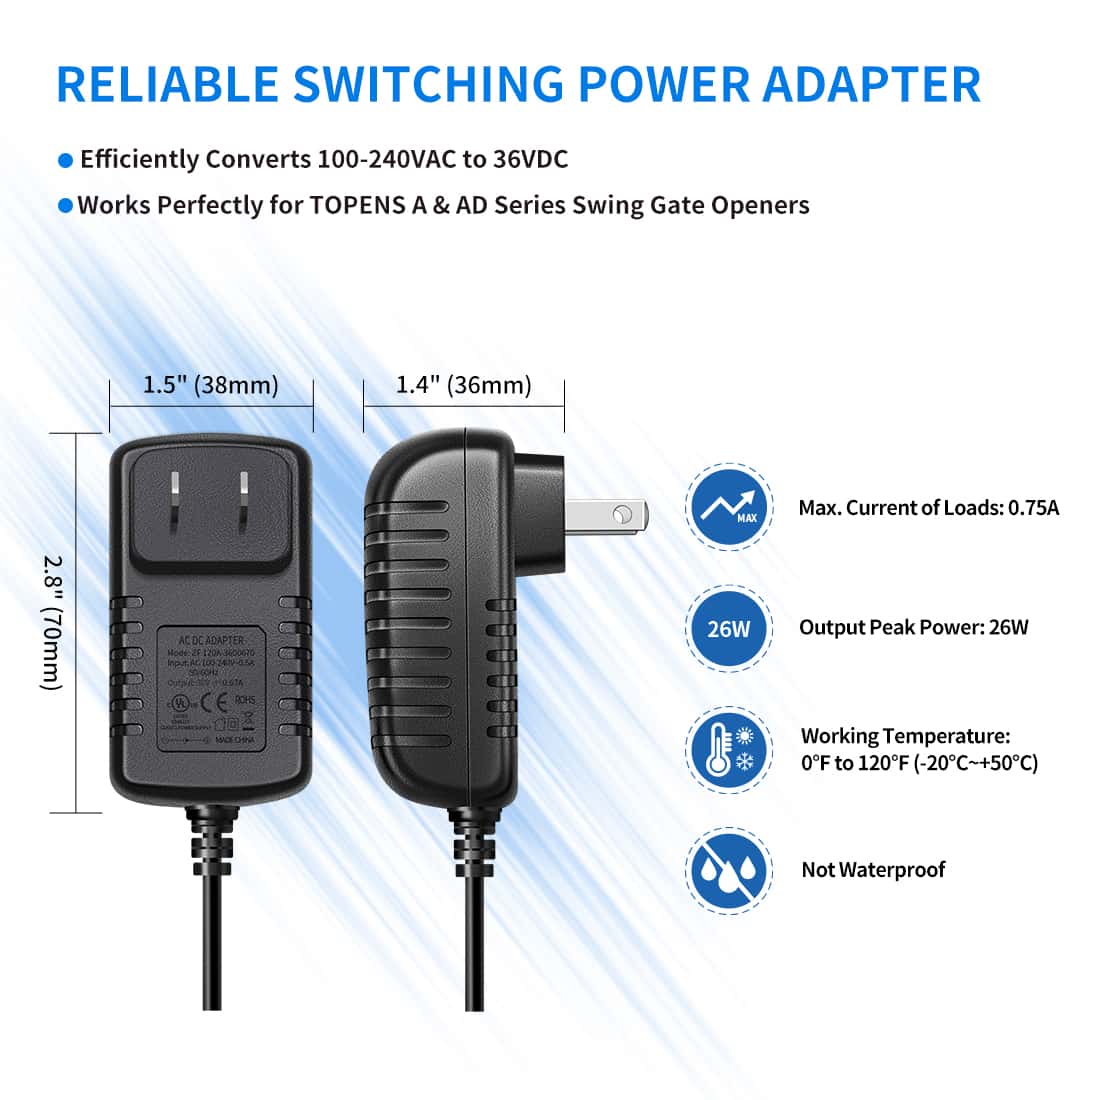 TS24-U AC to DC Adapter of Reliable Performance